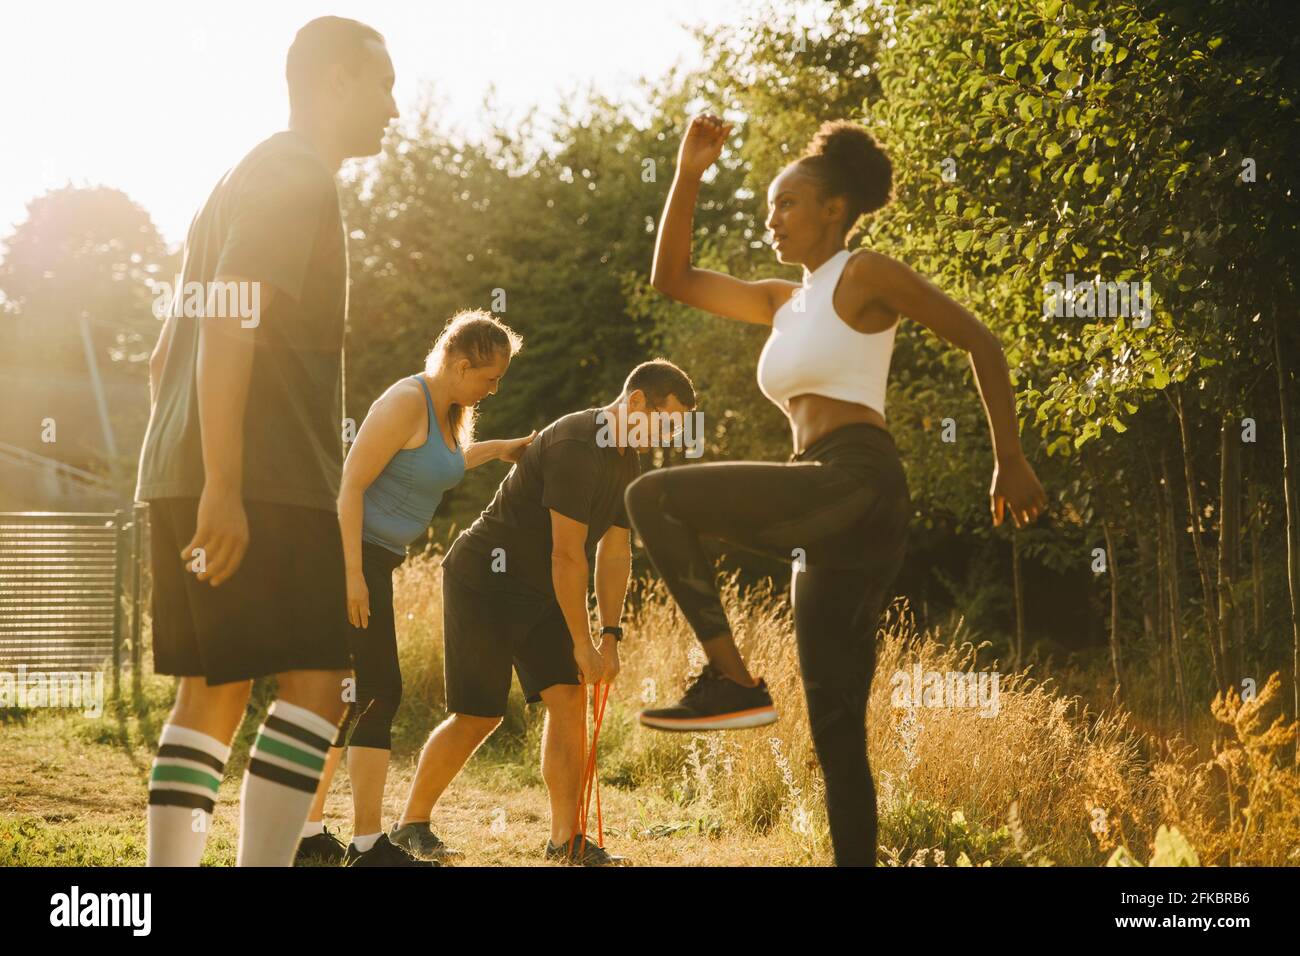 Male and female athletes practicing sports training in park Stock Photo